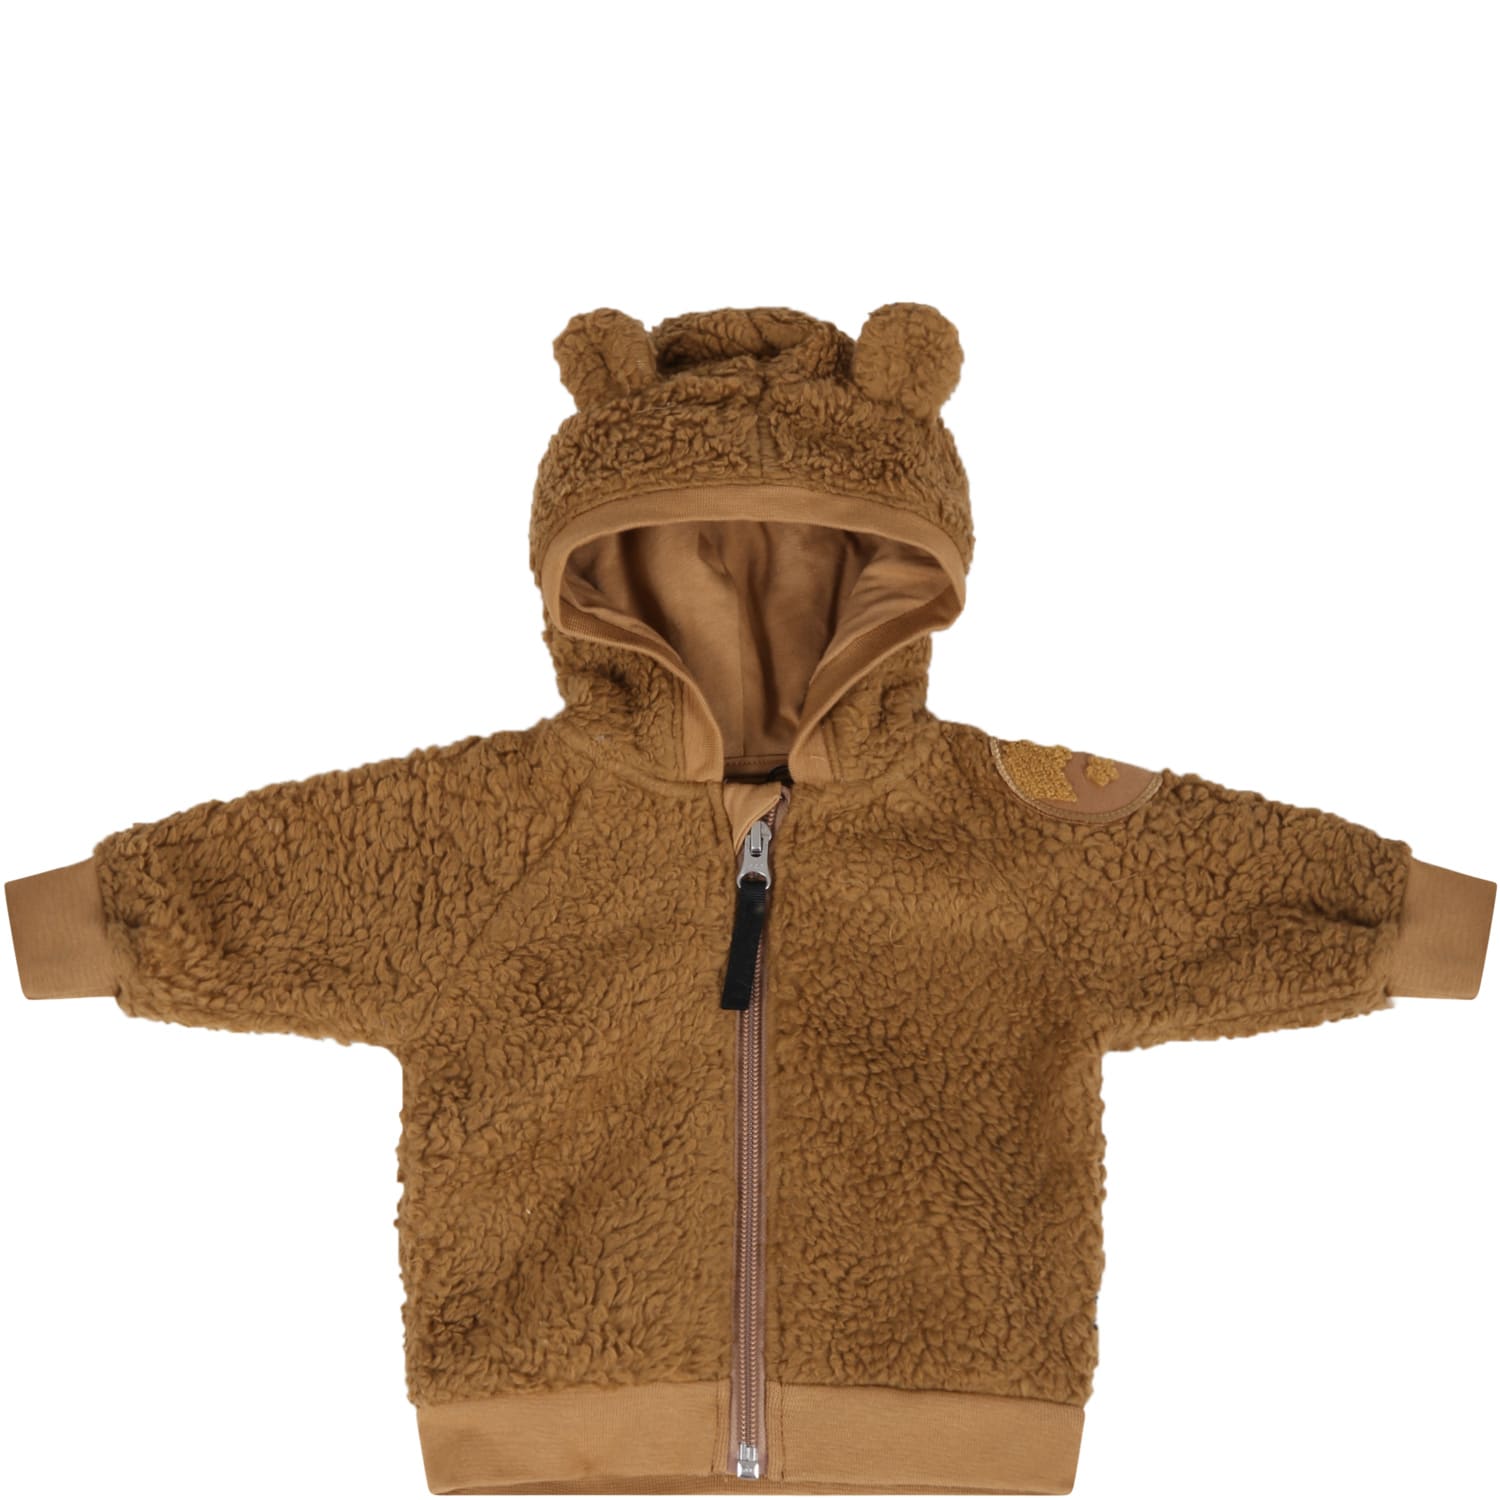 Molo Brown Sweatshirt For Babykids With Patch